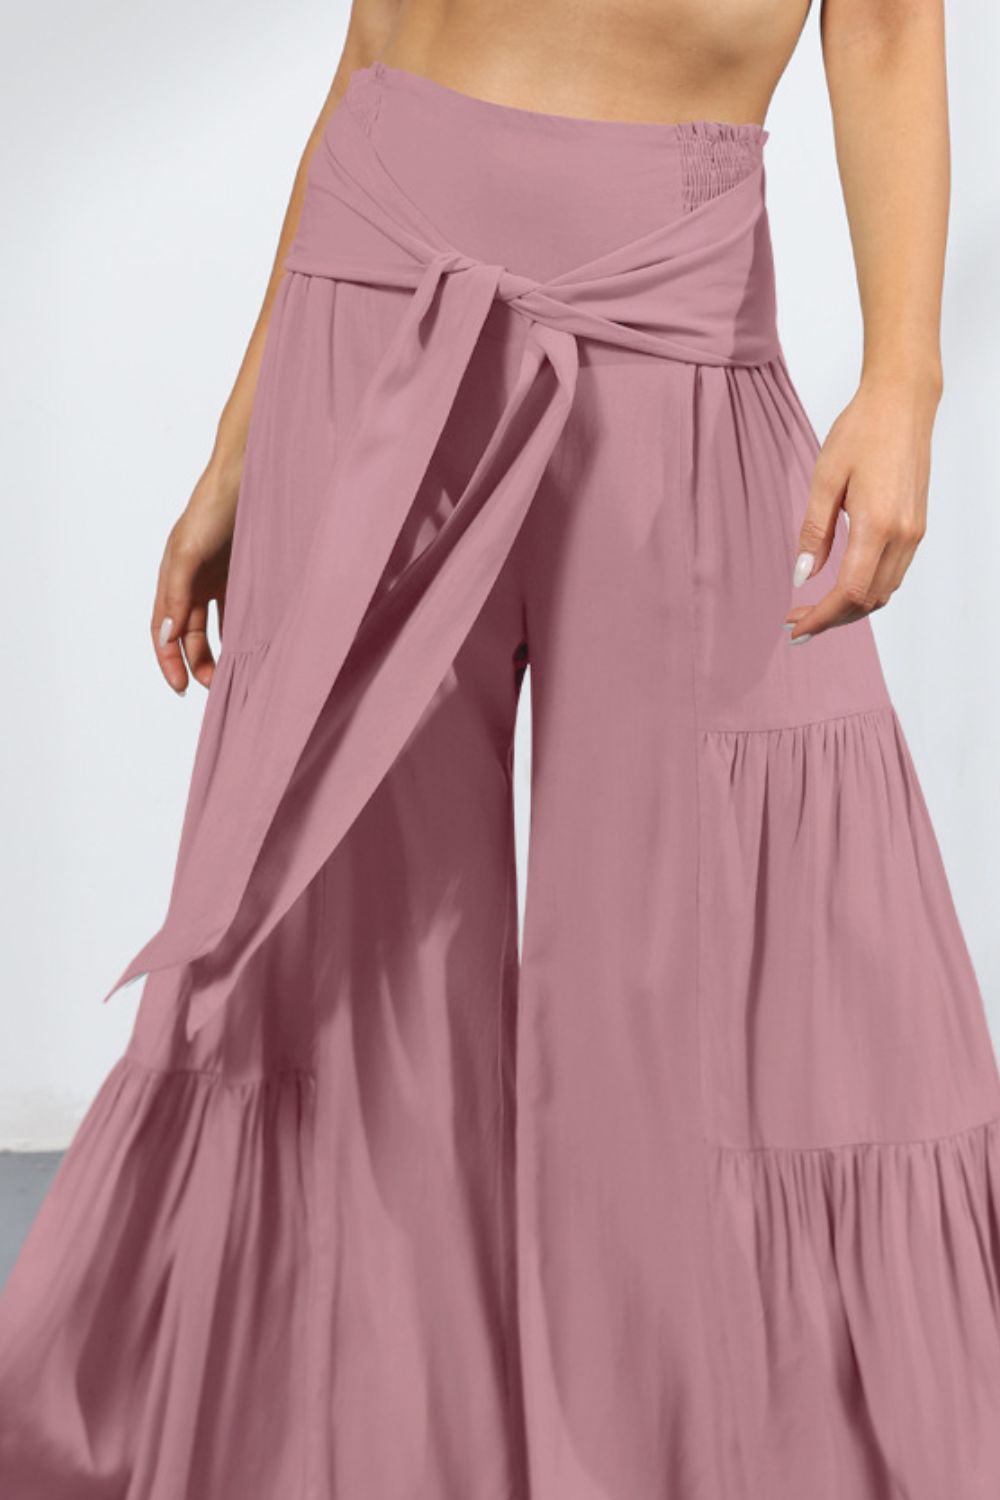 Pants - Tie Front Smocked Tiered Culottes